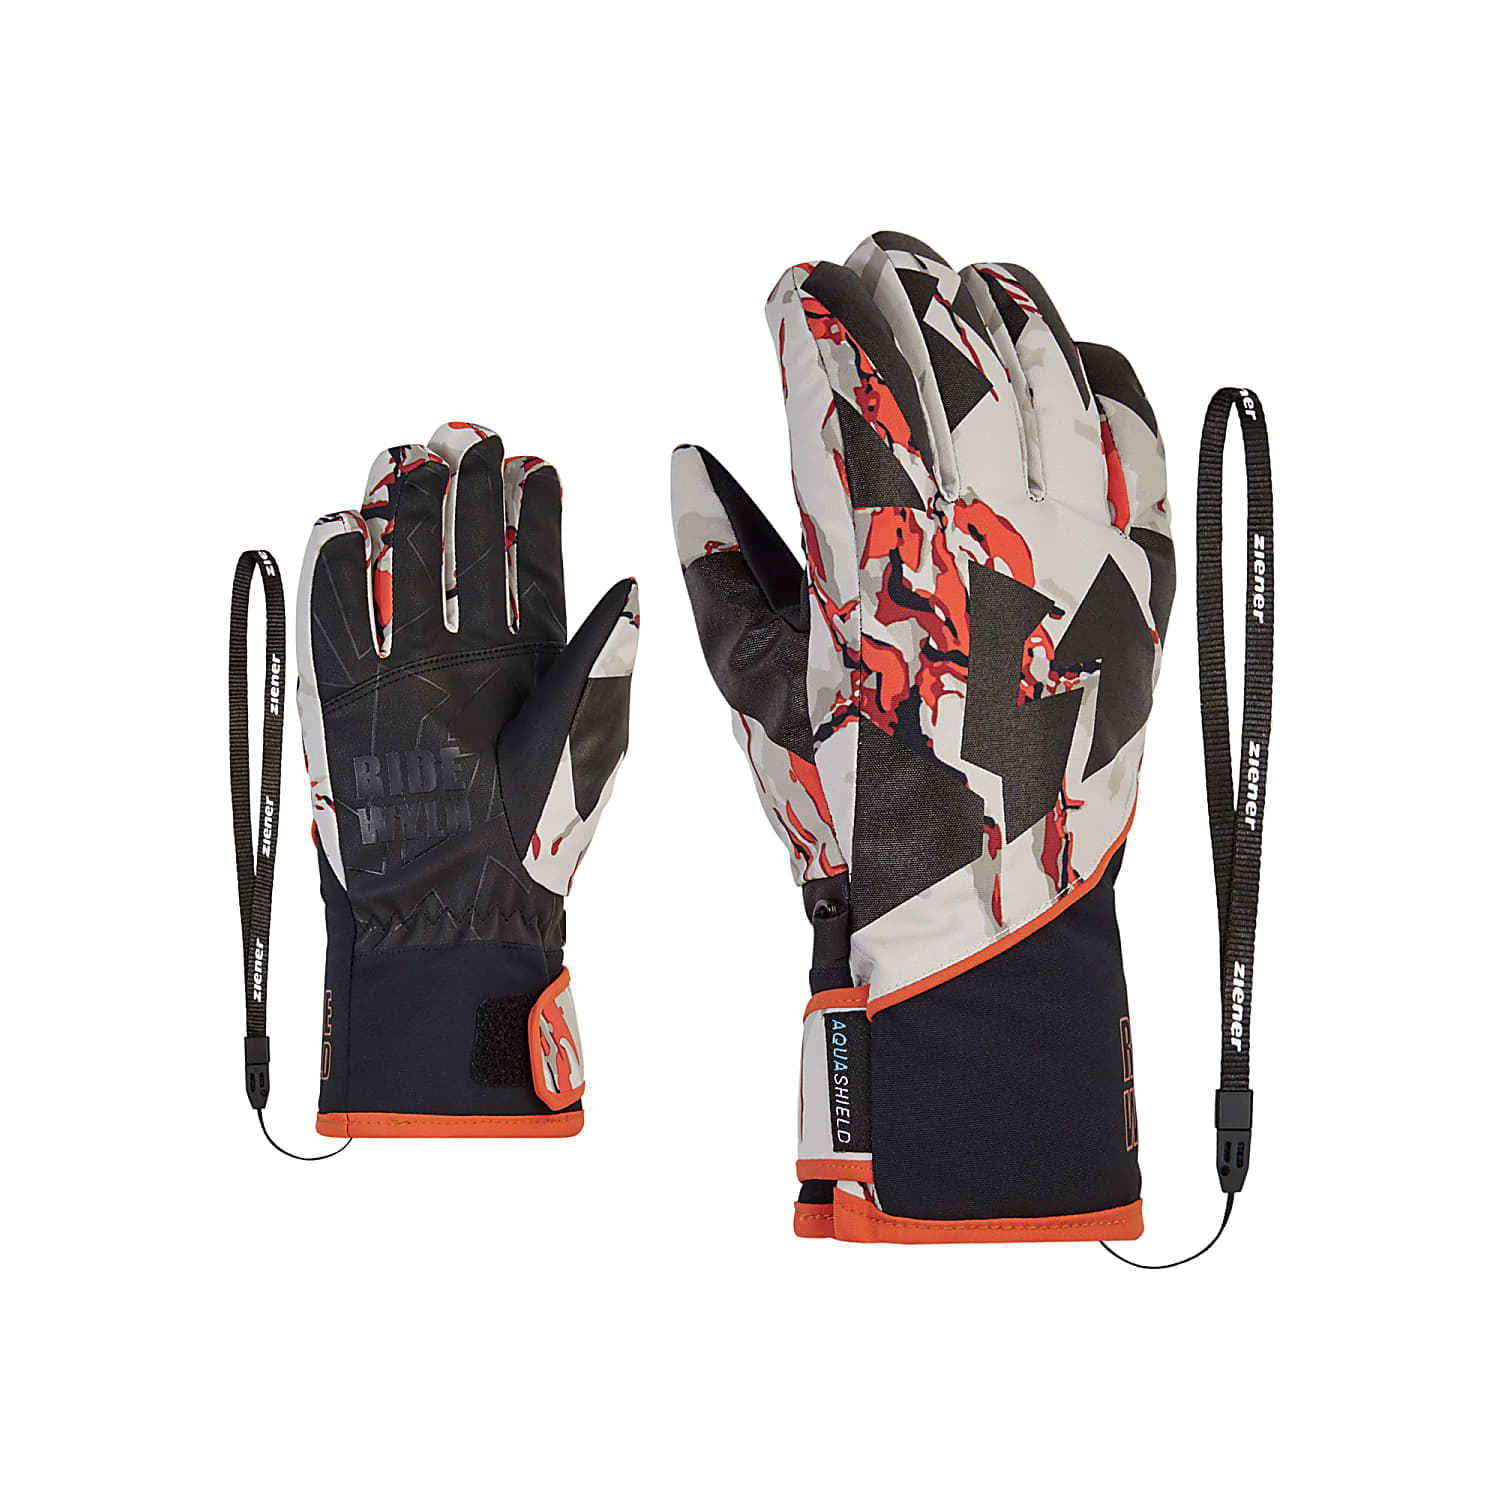 Fast LIWO Print cheap Ziener AS AW JUNIOR shipping - and GLOVE, Cliff